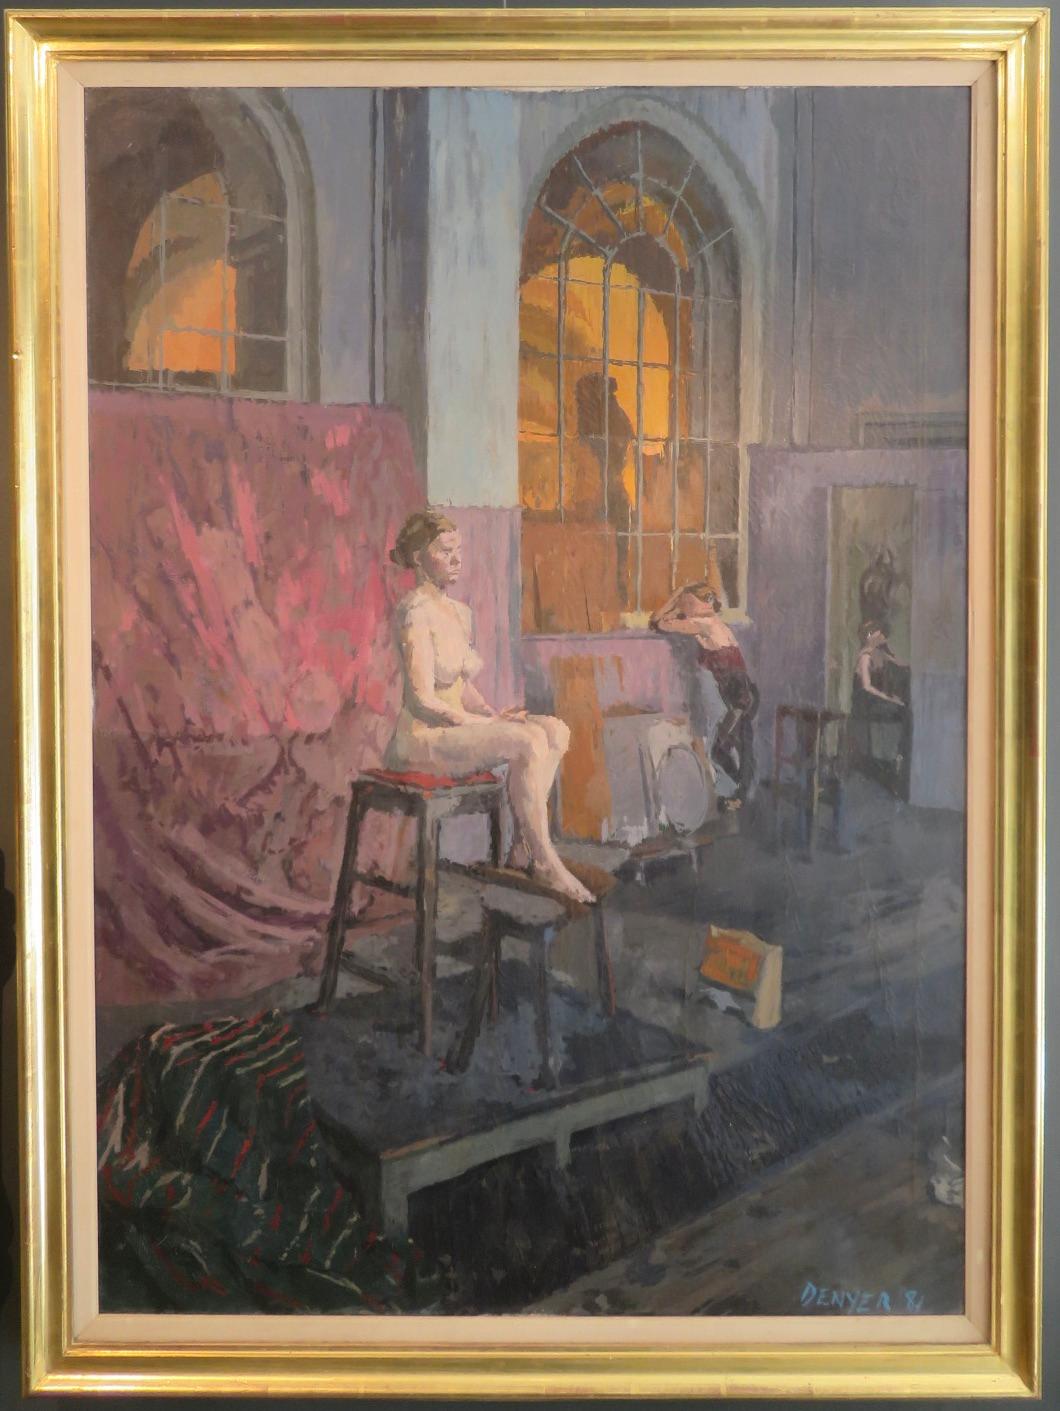  ARTIST: Stuart Denyer NEAC (1953-) British

TITLE: "The Studio At The Royal Academy London"

SIGNED: lower right and dated 1981

MEASURES: 120cm x 89cm inclusive of frame

CONDITION: Good but with some craquelure to the paint commensurate with the